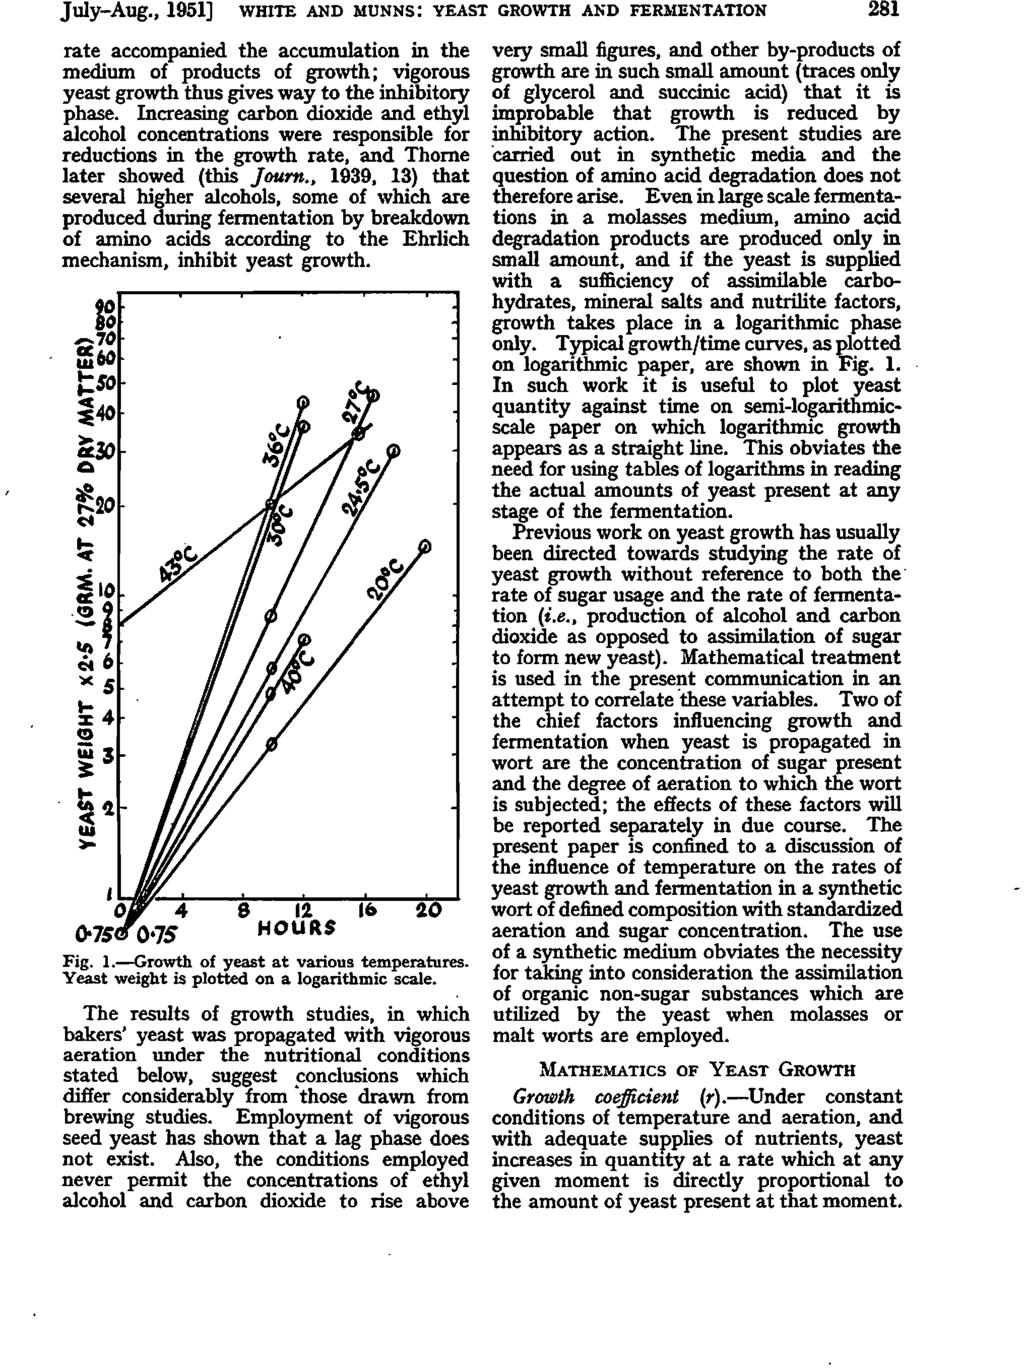 July-Aug., 1951] white and munns: growth and fermentation 281 rate accompanied the accumulation in the medium of products of growth; vigorous growth thus gives way to the inhibitory phase.